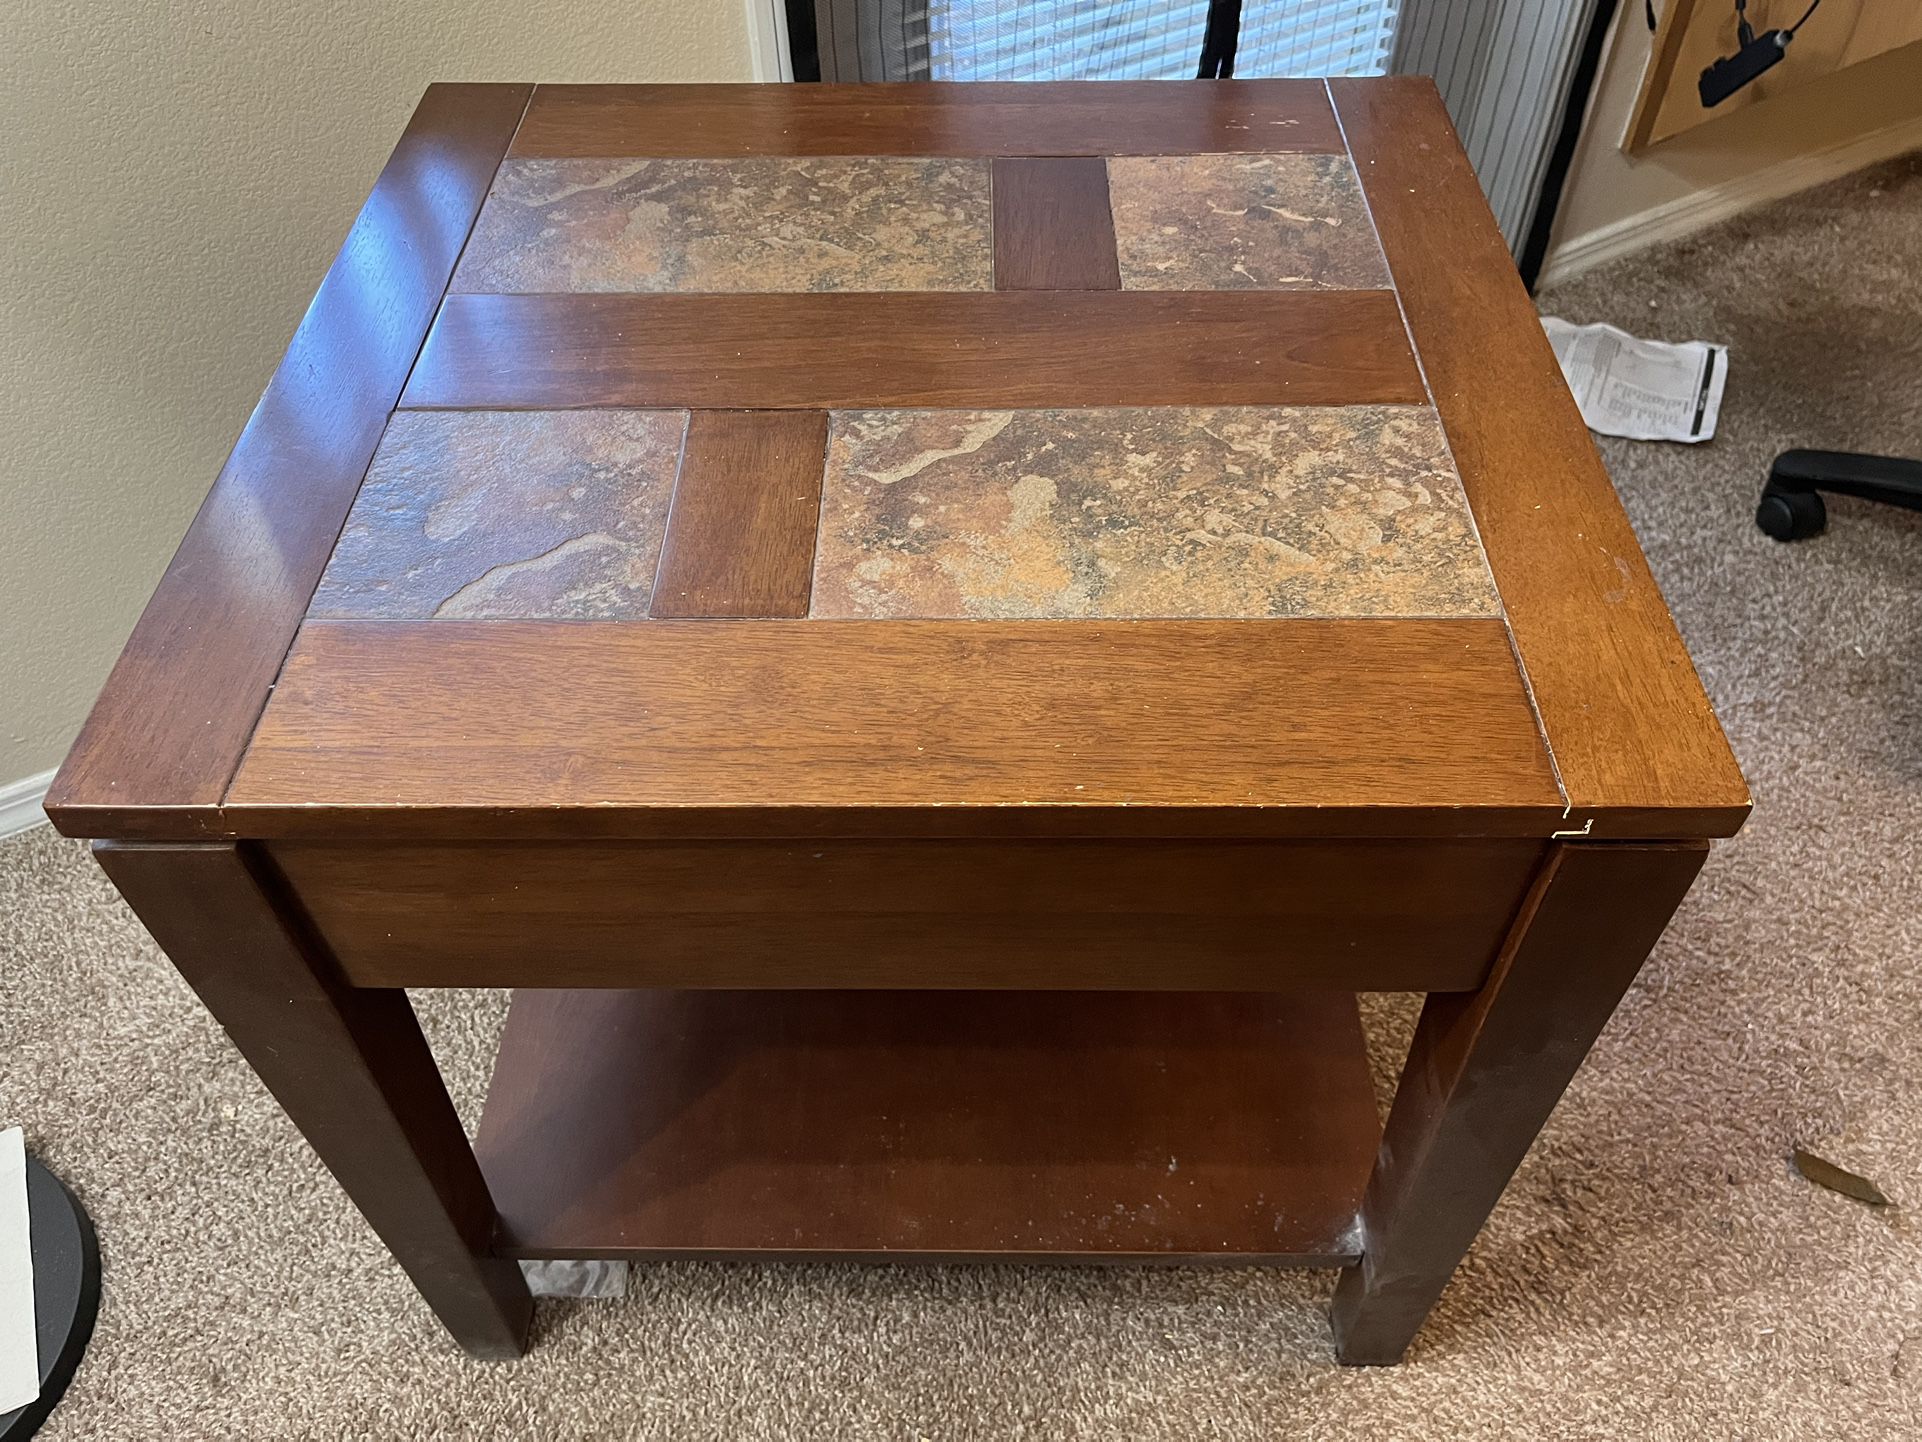 End Tables -2 matching